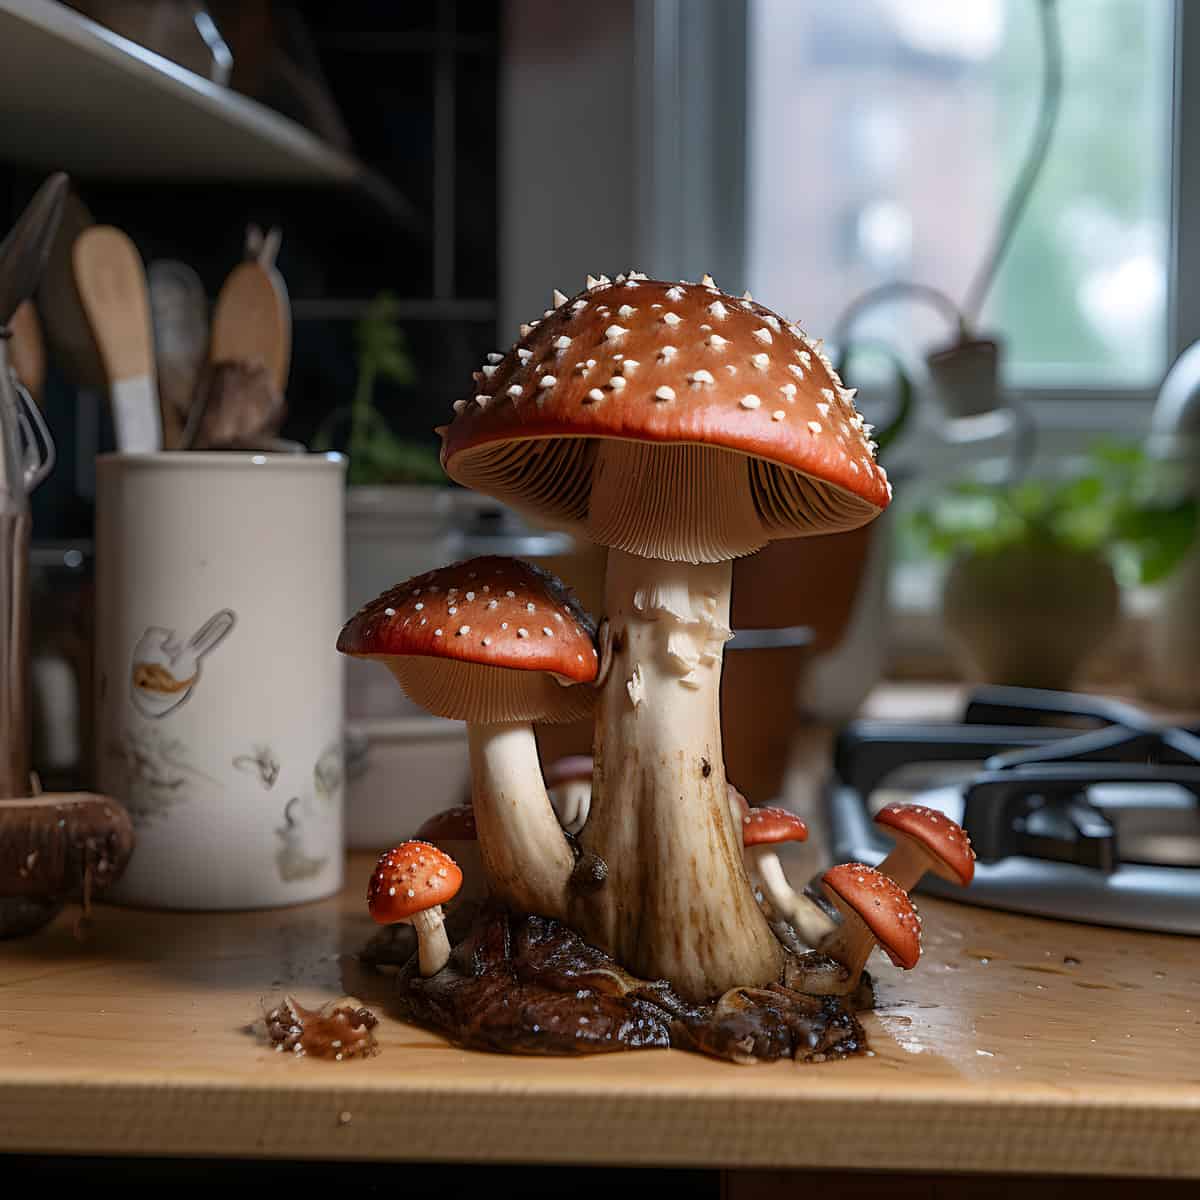 King Stropharia on a kitchen counter